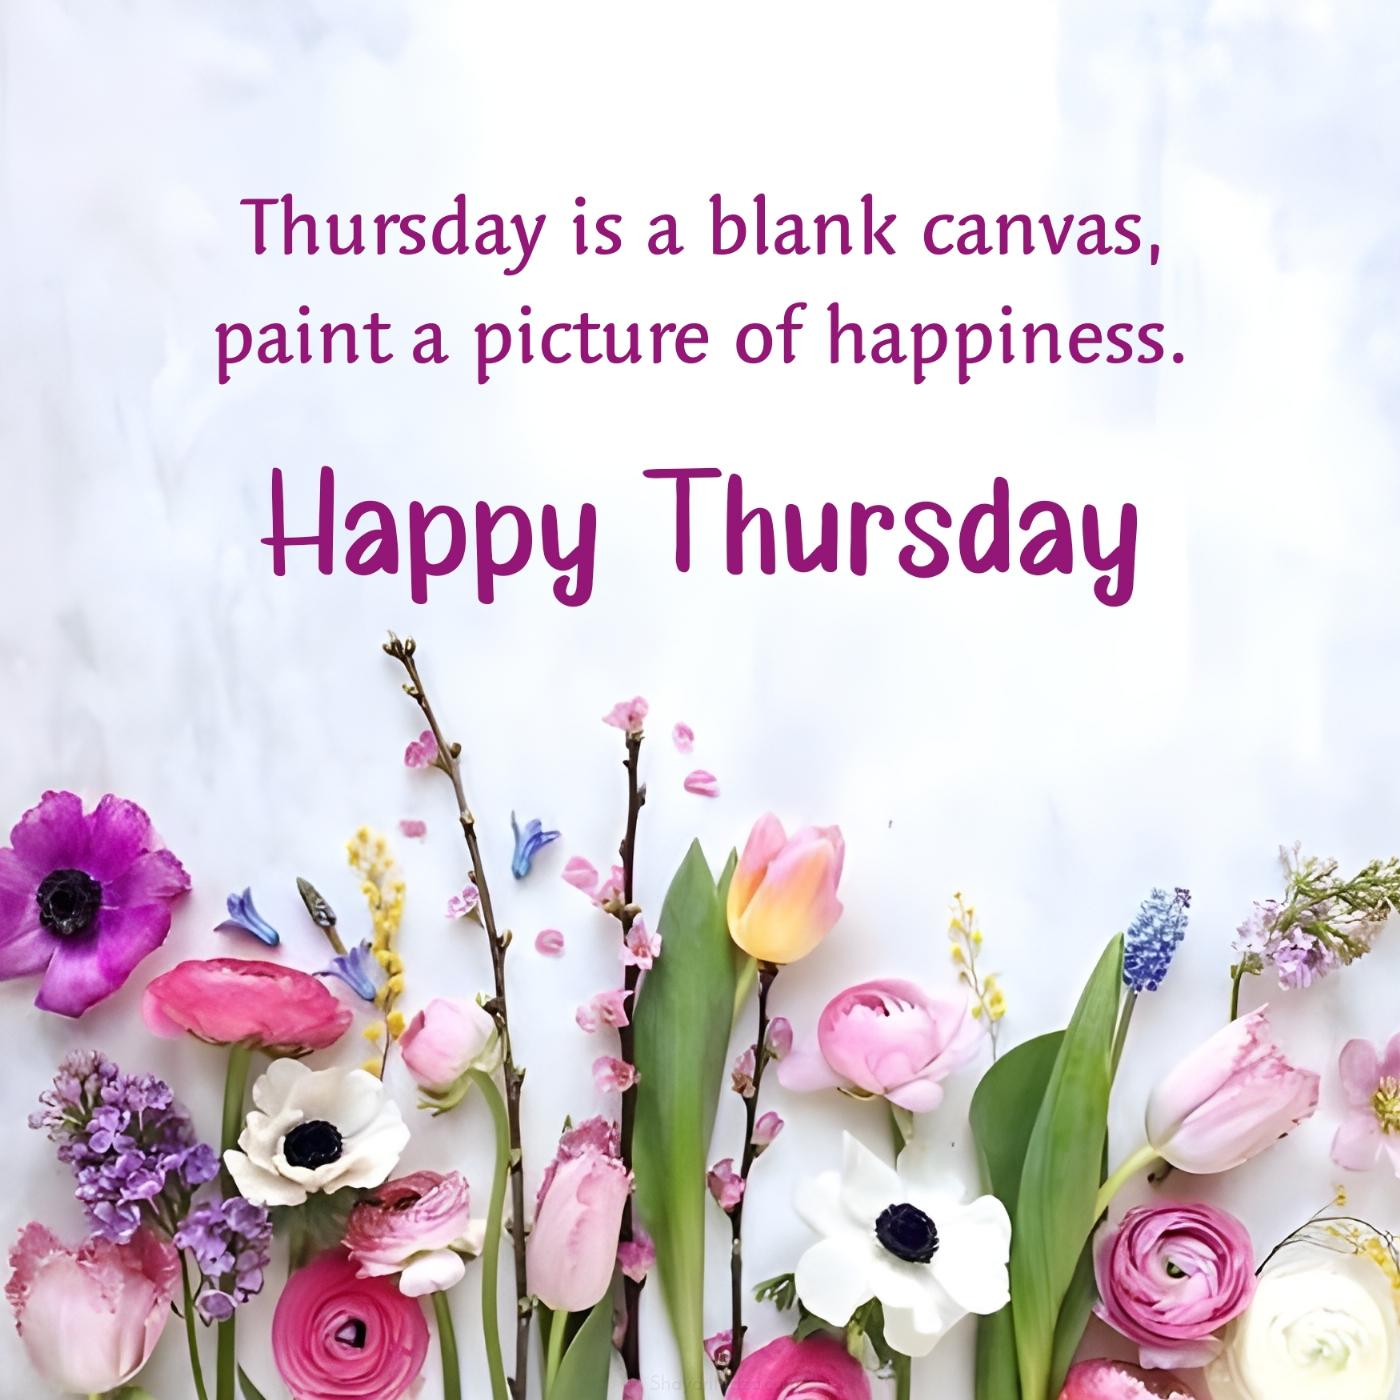 Thursday is a blank canvas paint a picture of happiness